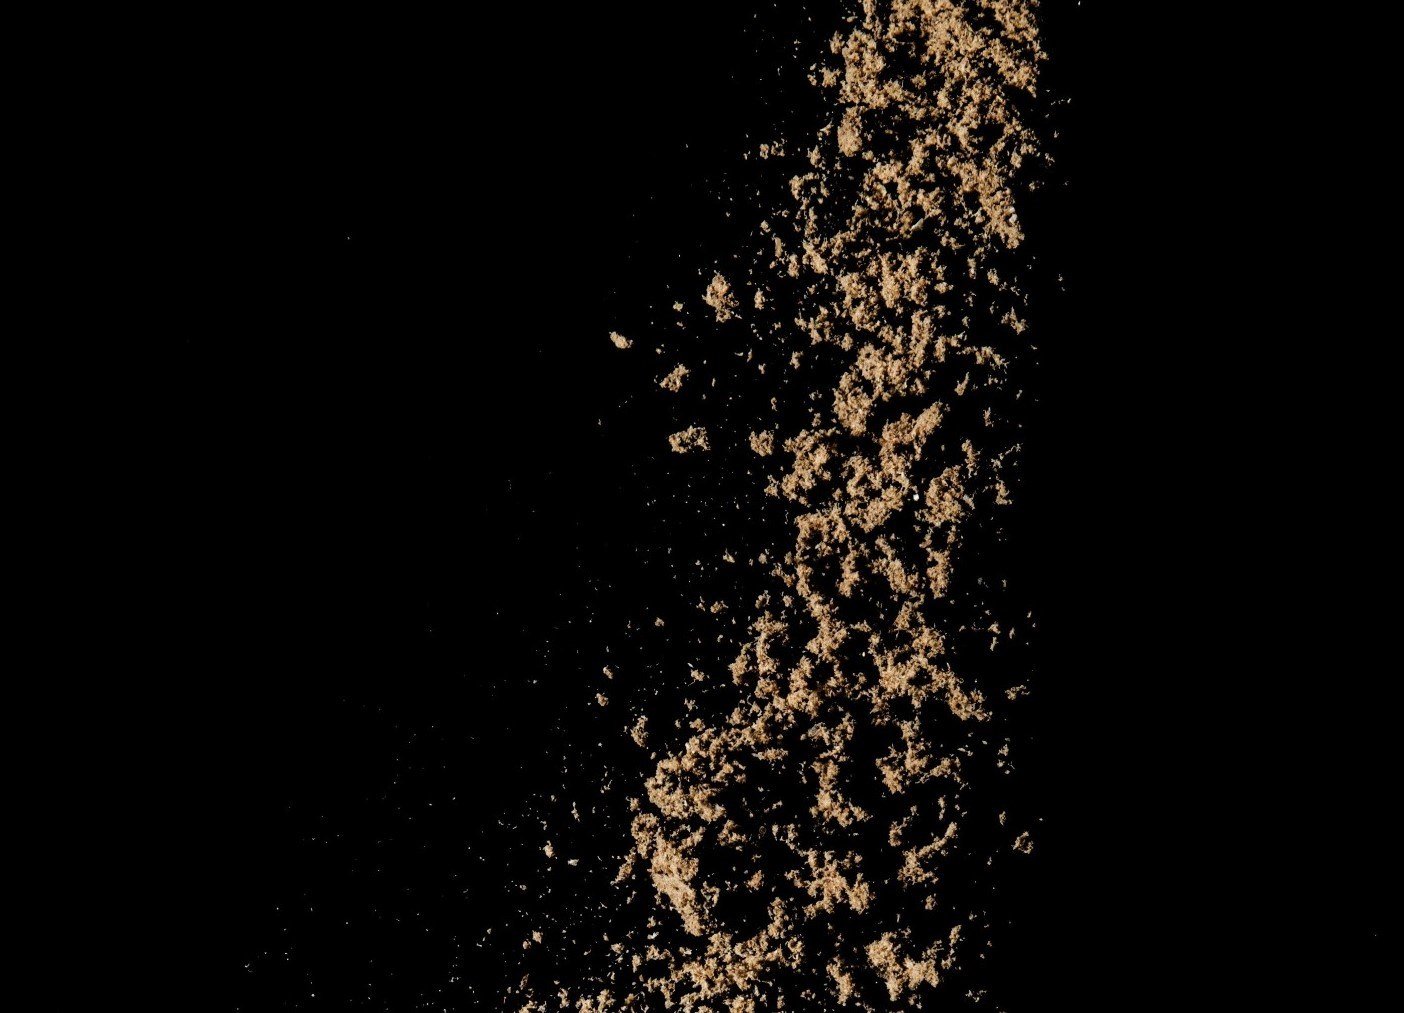 Fish meal dropping from above with a black background